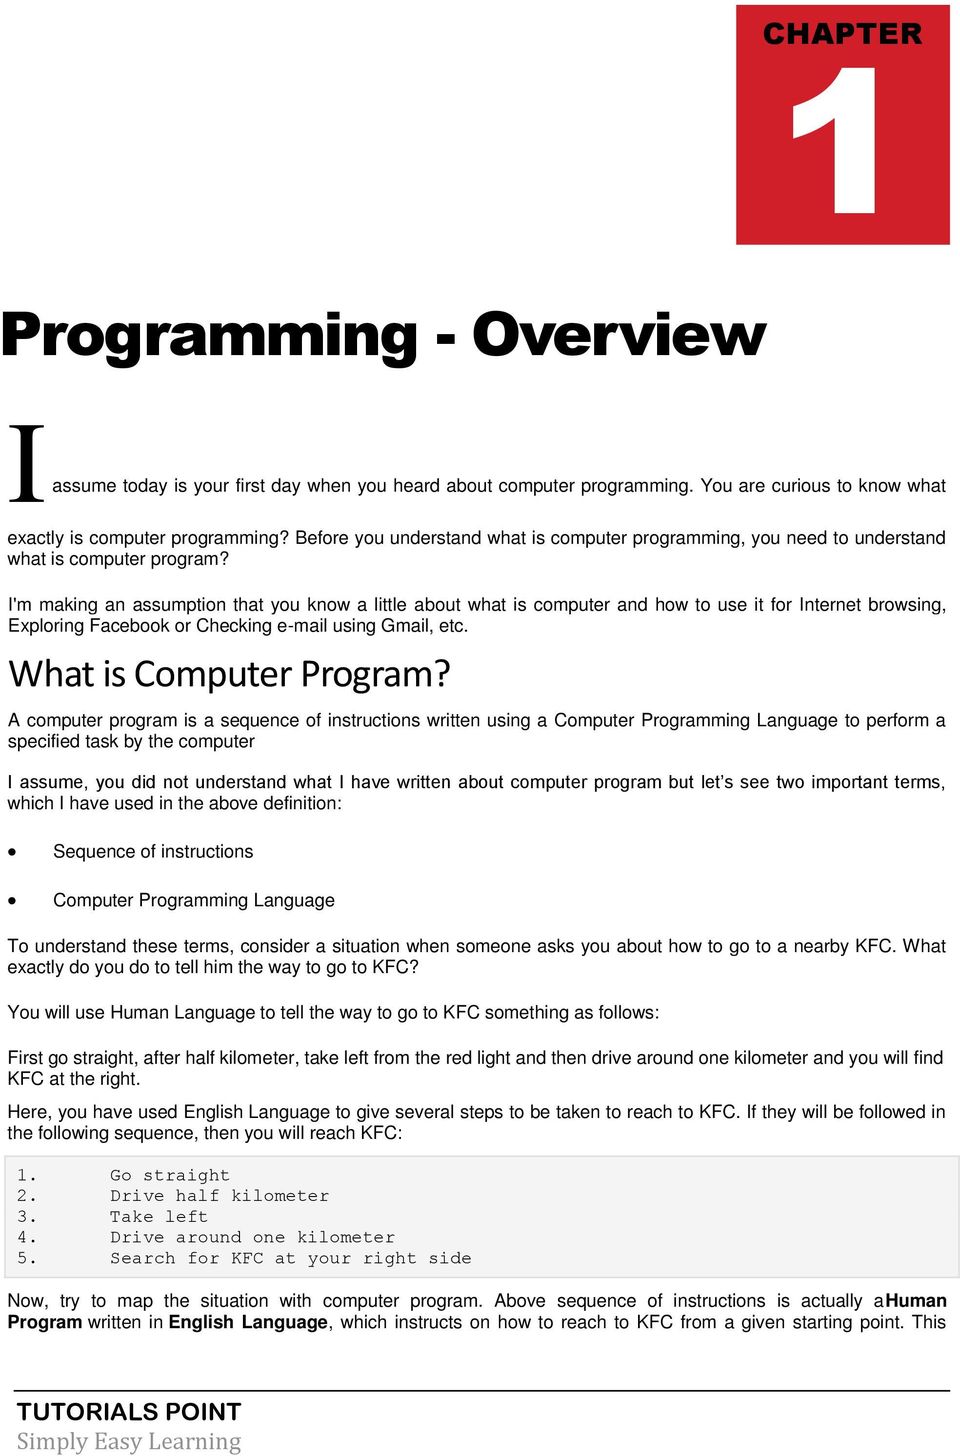 I'm making an assumption that you know a little about what is computer and how to use it for Internet browsing, Exploring Facebook or Checking e-mail using Gmail, etc. What is Computer Program?